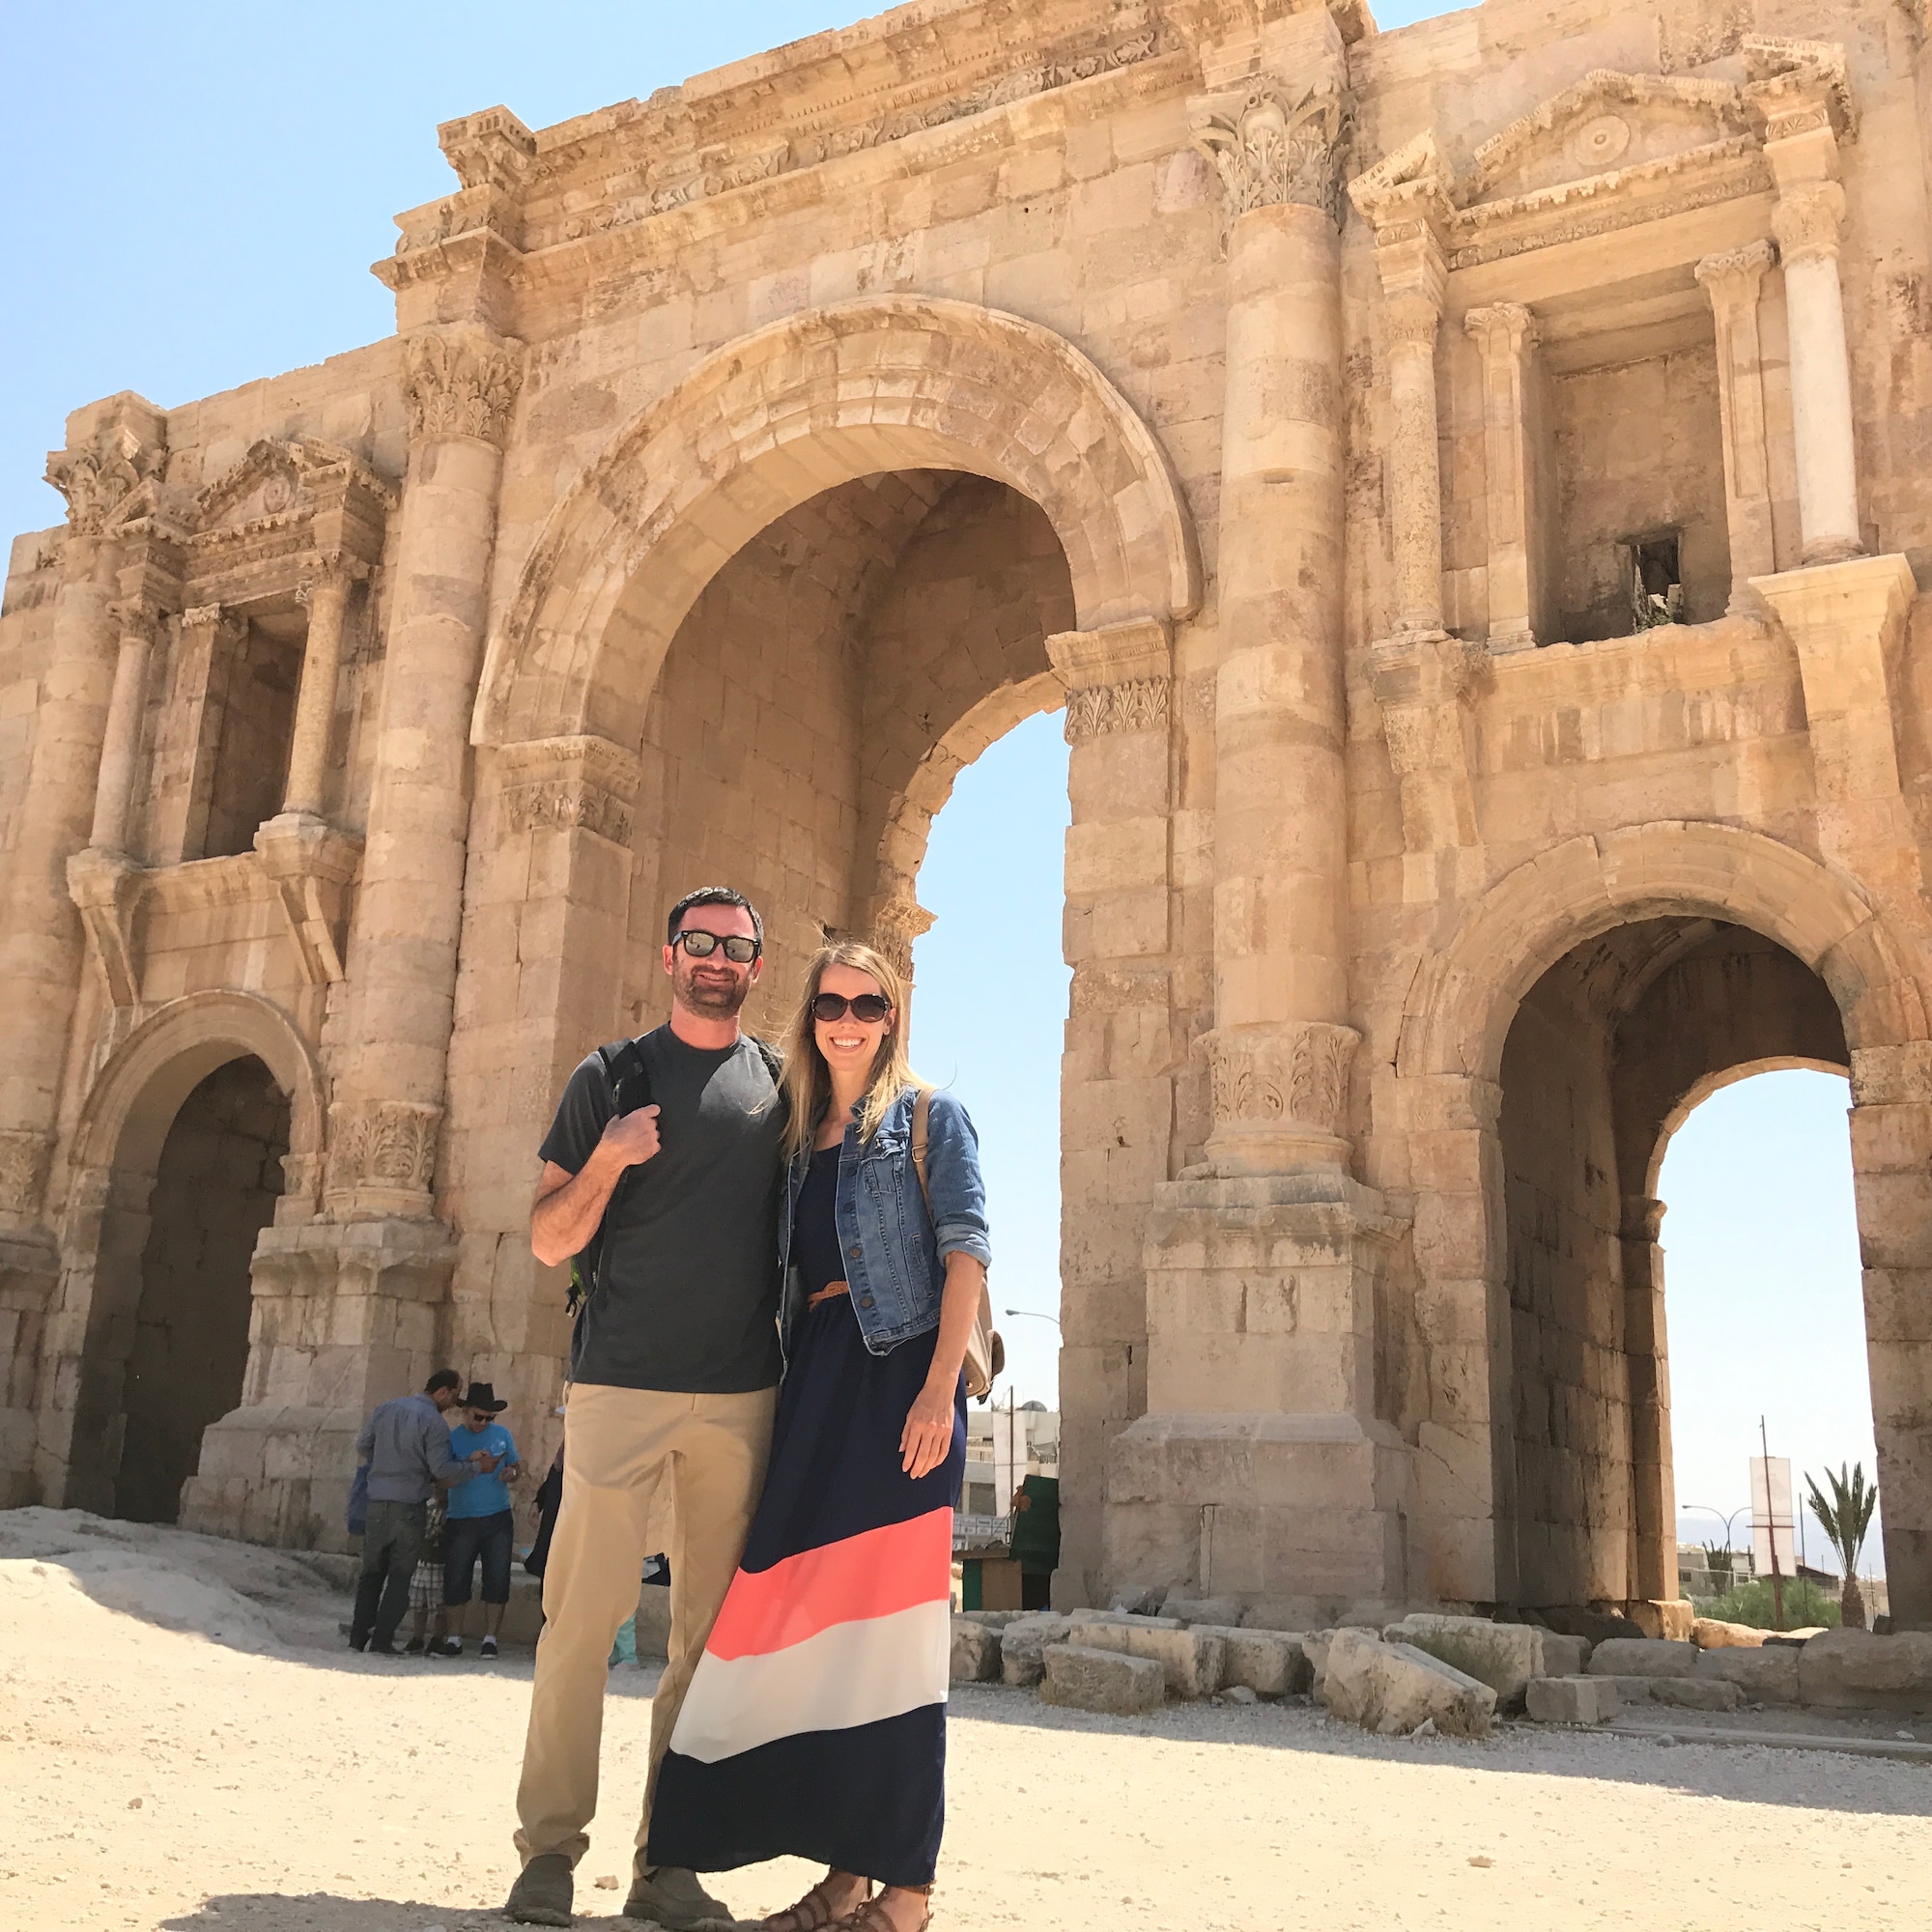 Capt Jennie Seibert and a fellow LEAP scholar at the Arch of Hadrian in Jordan. Photo compliments of Capt Seibert.